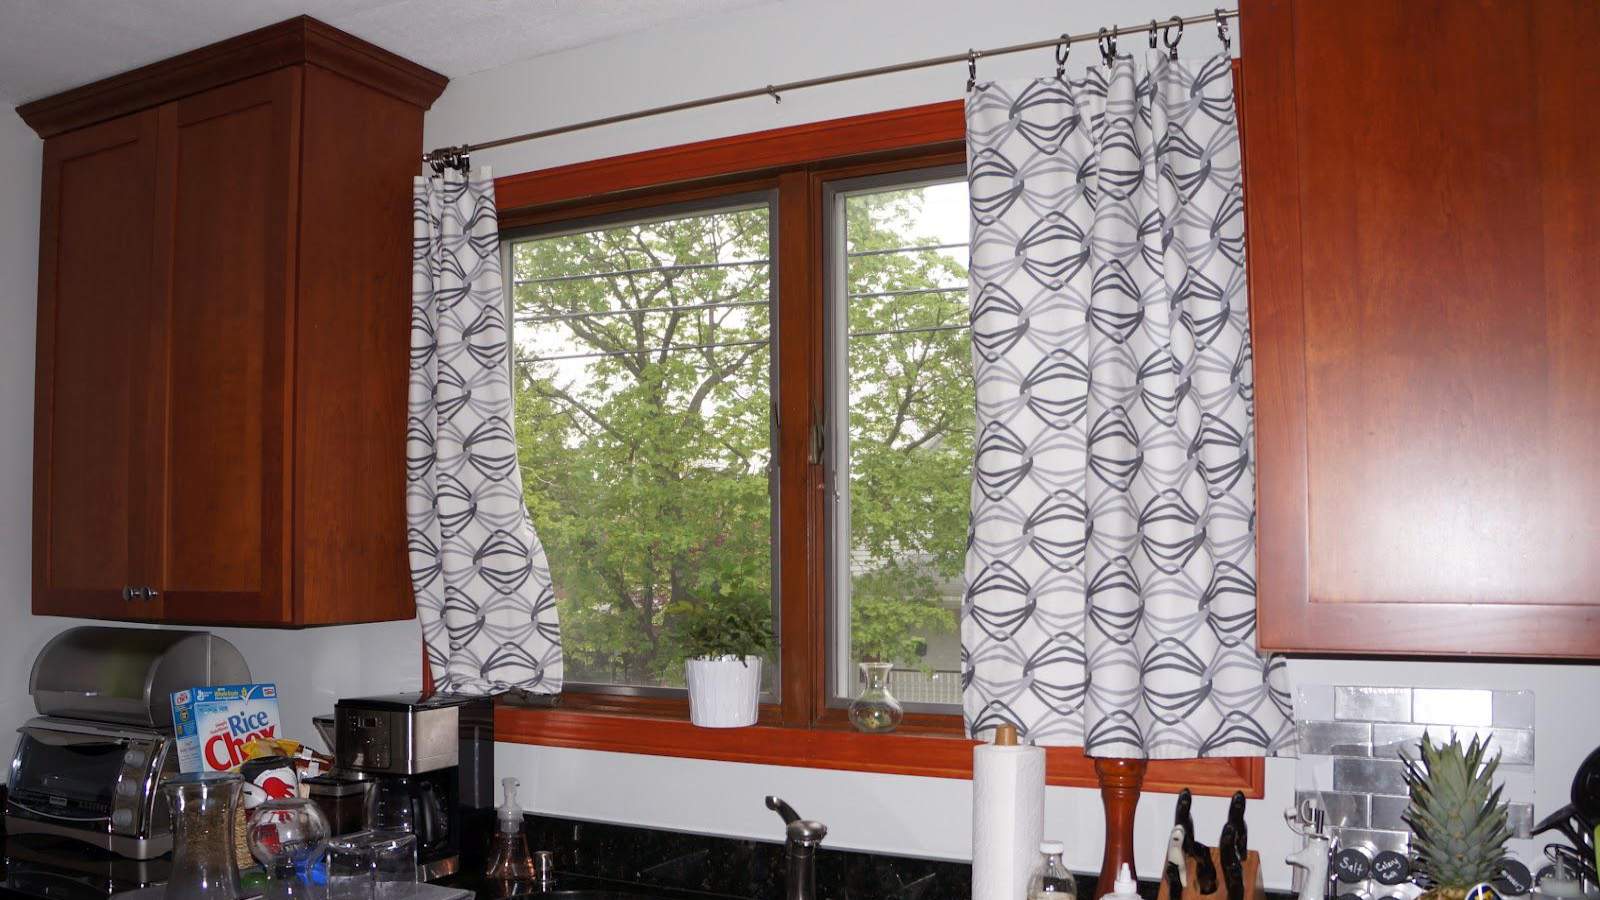 5 Kitchen Curtains Ideas With Different Styles - Interior ...